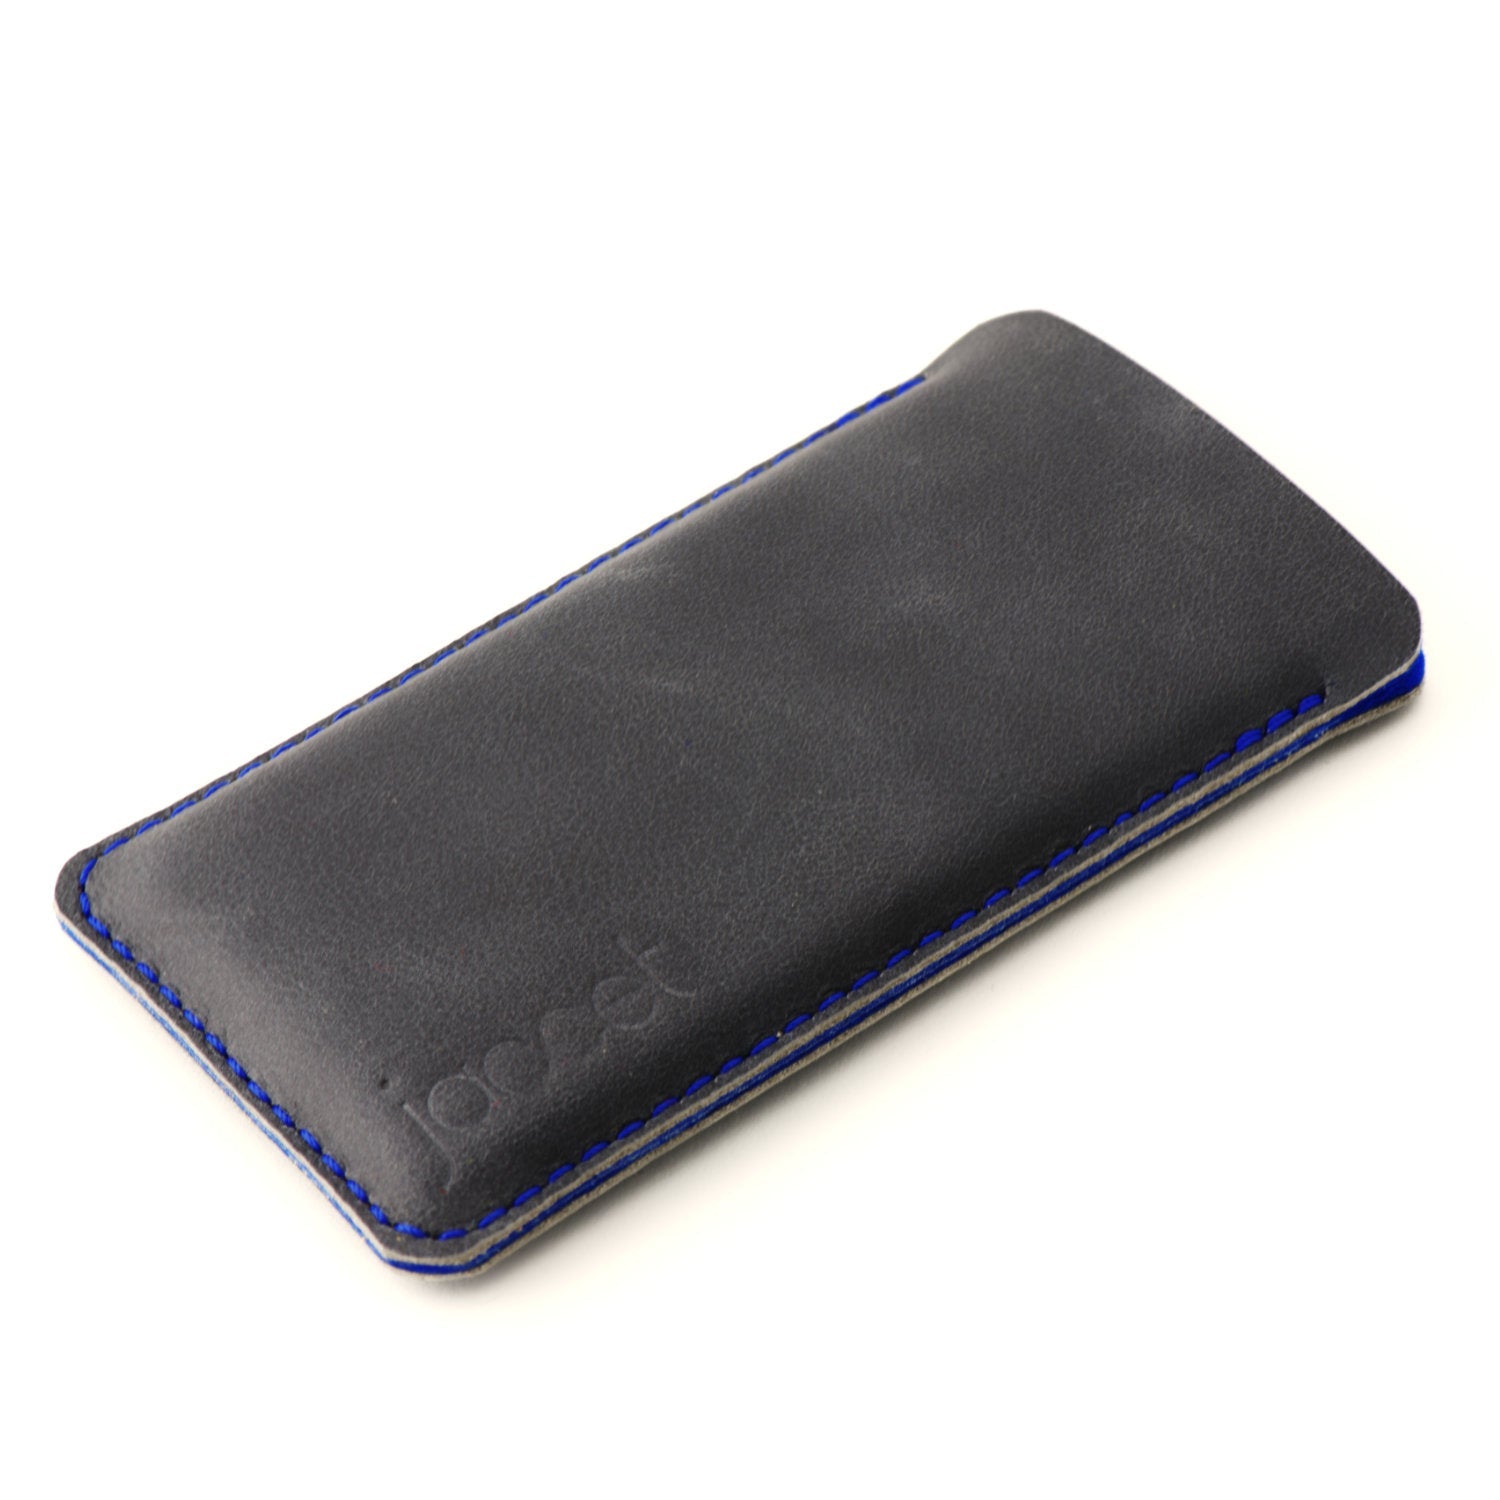 JACCET leather OPPO sleeve - anthracite/black leather with blue wool felt. 100% Handmade